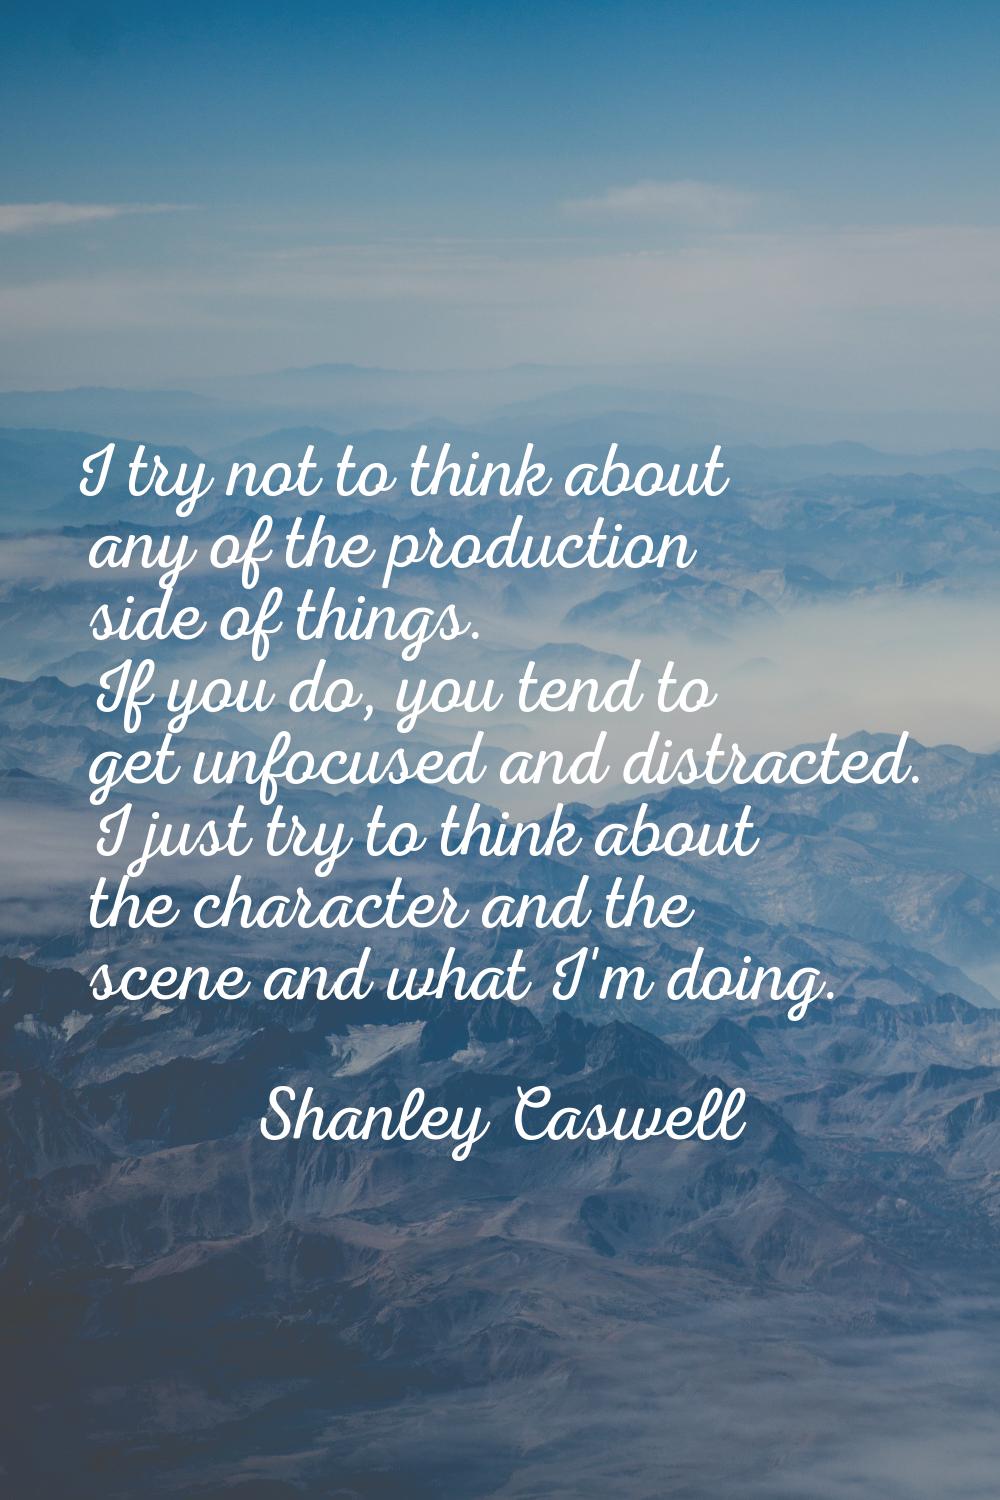 I try not to think about any of the production side of things. If you do, you tend to get unfocused